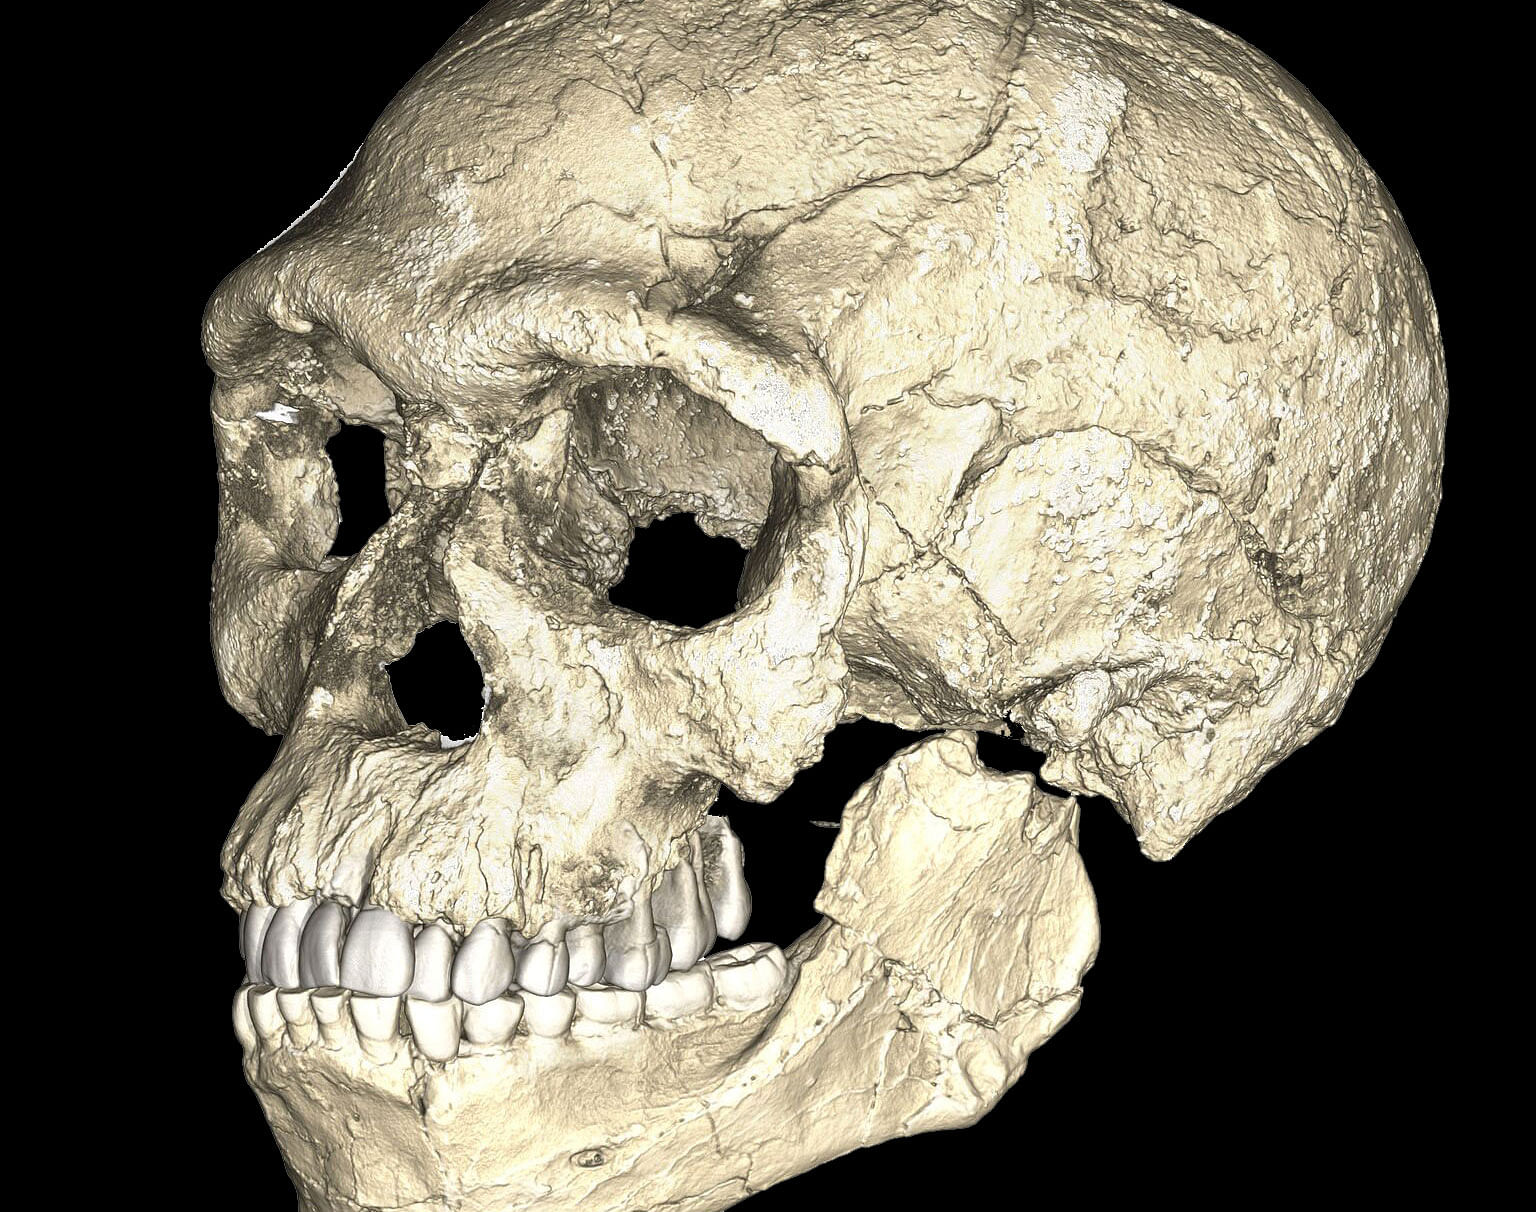 A composite reconstruction of the earliest known Homo sapiens fossils from Jebel Irhoud in Morocco, based on micro computed tomographic scans of multiple original fossils, is shown in this undated handout photo obtained by Reuters June 7, 2017. Dated to 300 thousand years ago these early Homo sapiens already have a modern-looking face that falls within the variation of humans living today. However, the archaic-looking braincase indicates that brain shape, and possibly brain function, evolved within the Homo sapiens lineage. Reuters photo.